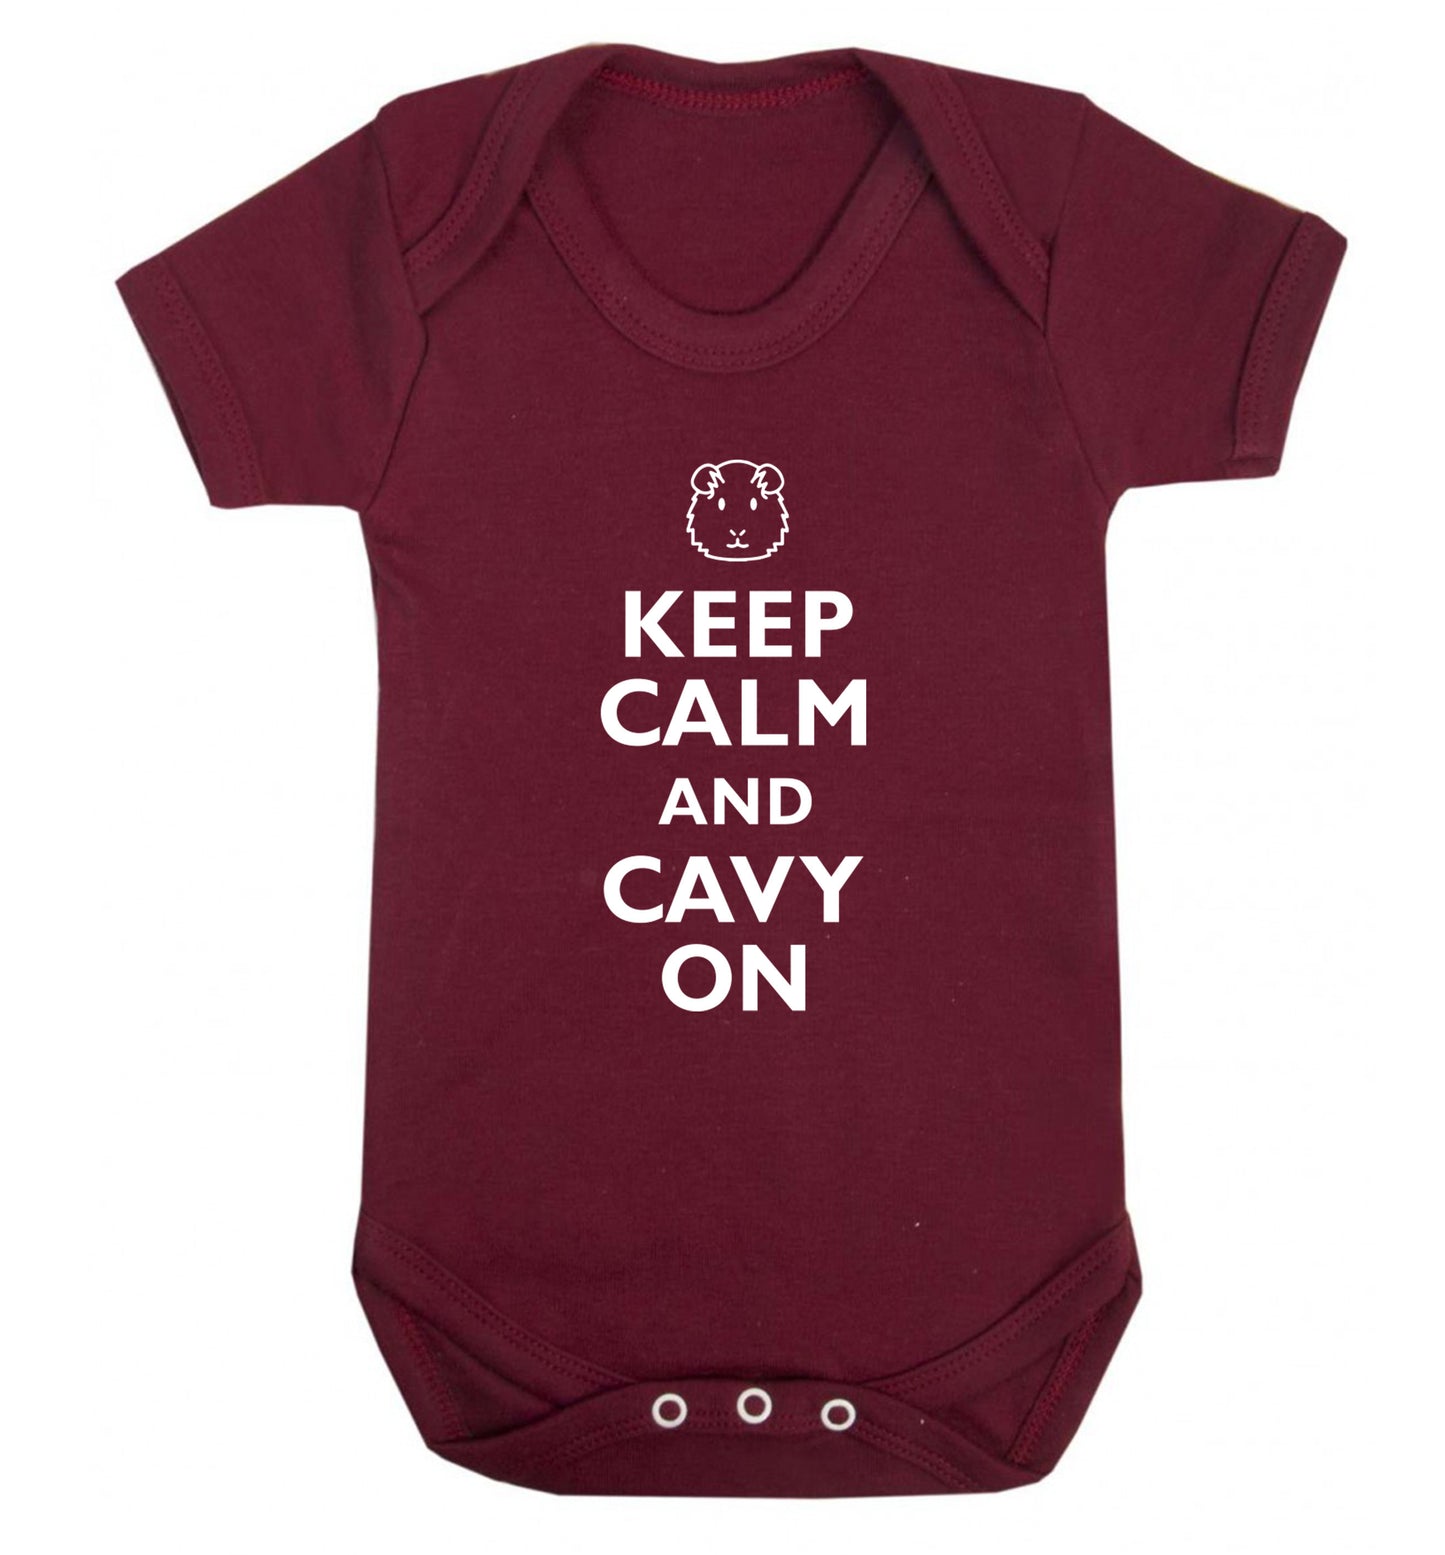 Keep calm and cavvy on Baby Vest maroon 18-24 months